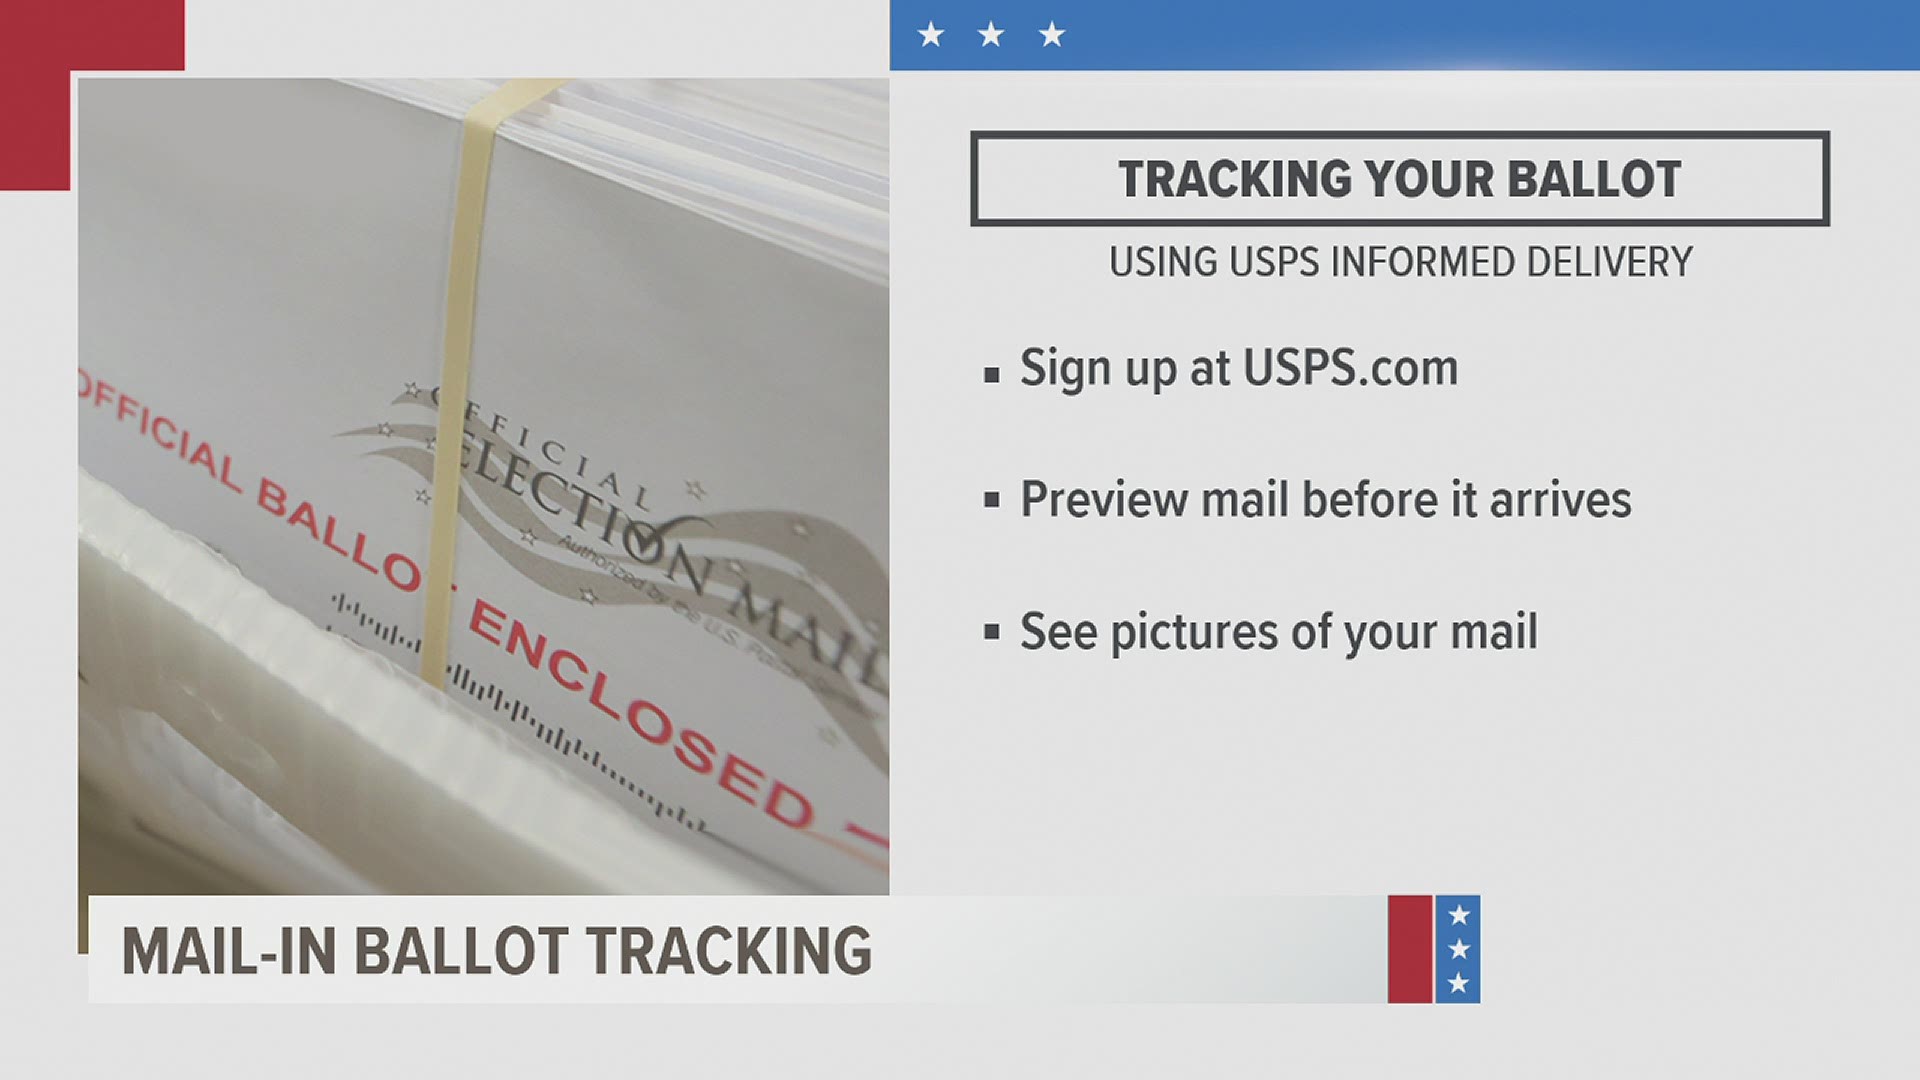 There are two ways to track your mail-in ballot in Pennsylvania, both requiring internet.